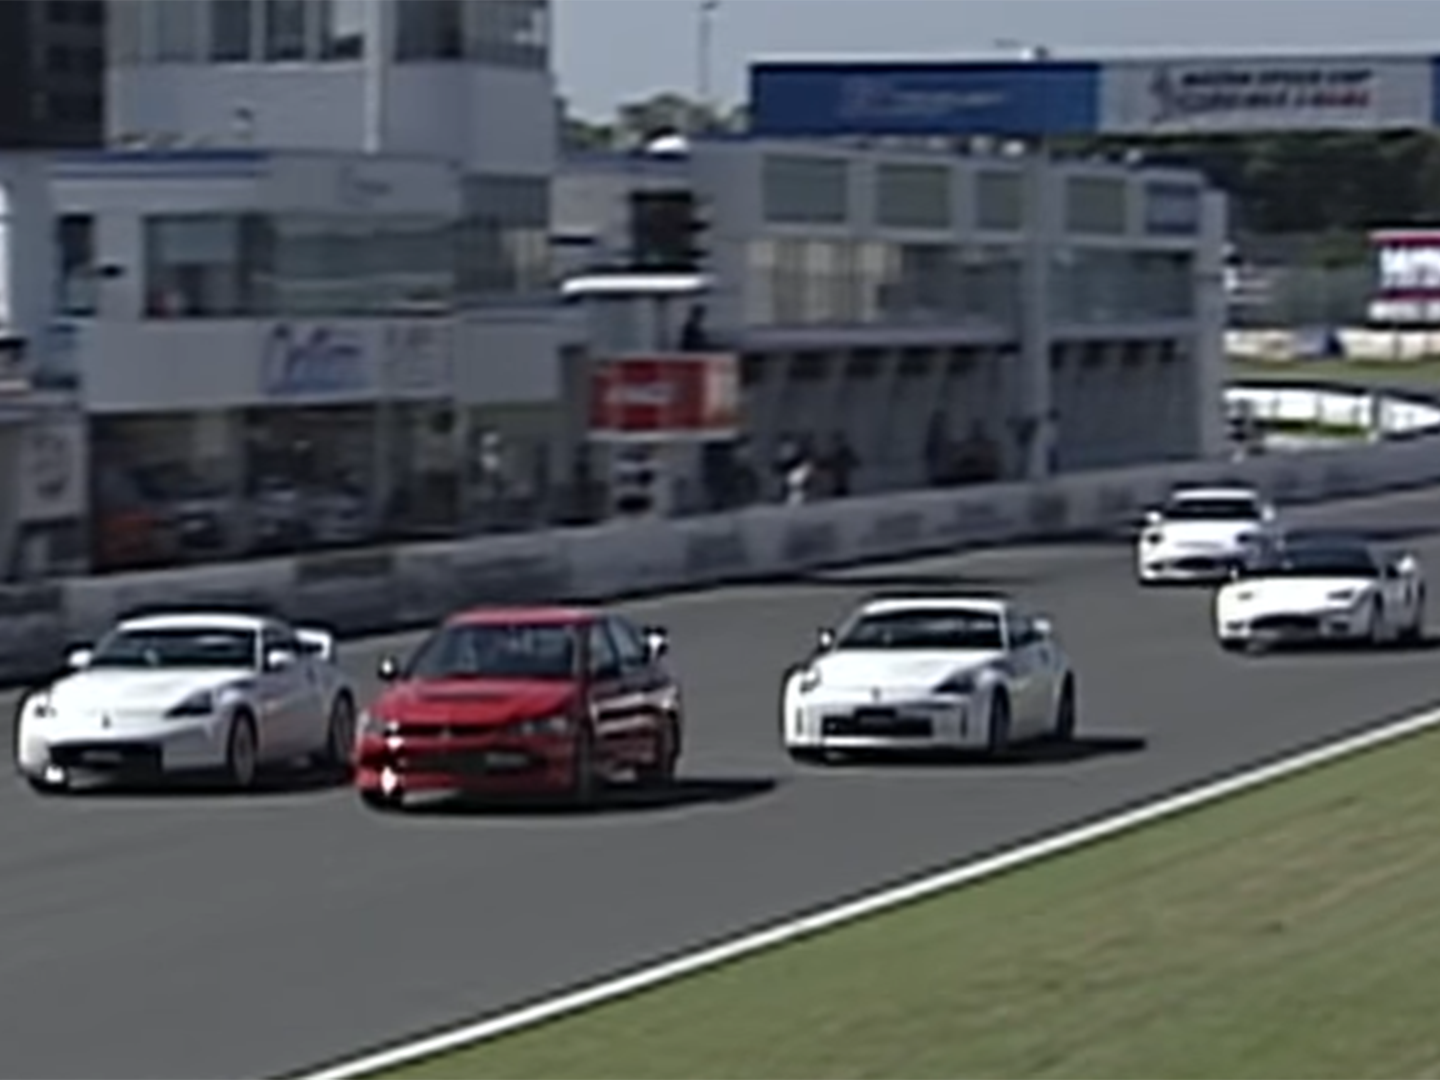 It’s Friday, So Watch This Real-Life Gran Turismo Race